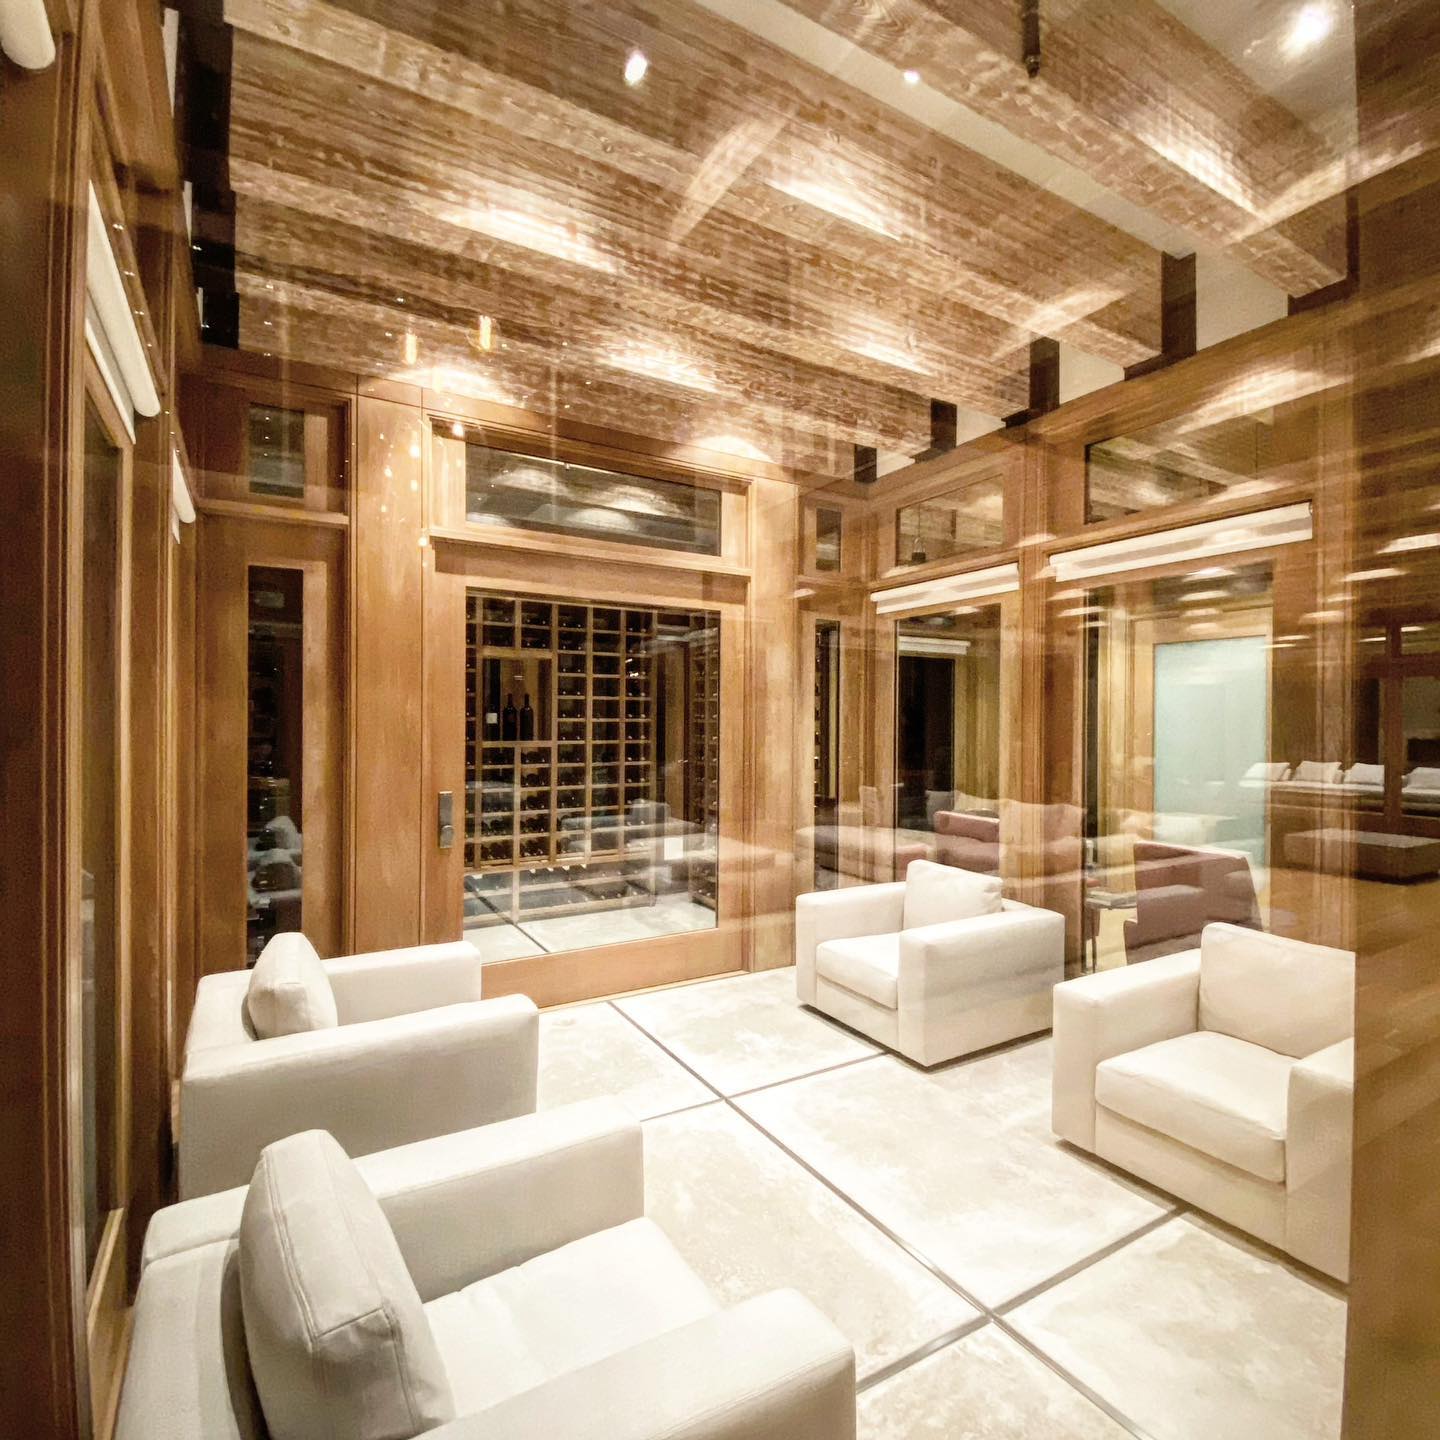 It’s like a jewel box made of glass, the amount of detail I put into this room was unbelievable. I had a lot of fun doing it, I think it turned out pretty good. #scottgillendotcom
#interiordesign #interiordesigner #instahome #realestate #luxuryhome #customfurniture #designdecor #decorinspiration  #beautifulhome #interior #interiors #interiorstyling #realestate  #scottgillen #architecture #malibu #scottgillen #design #openspacehomes #instahome #realestate #luxuryhome #designdecor #decor #interior  #scottgillendesign #newconstruction